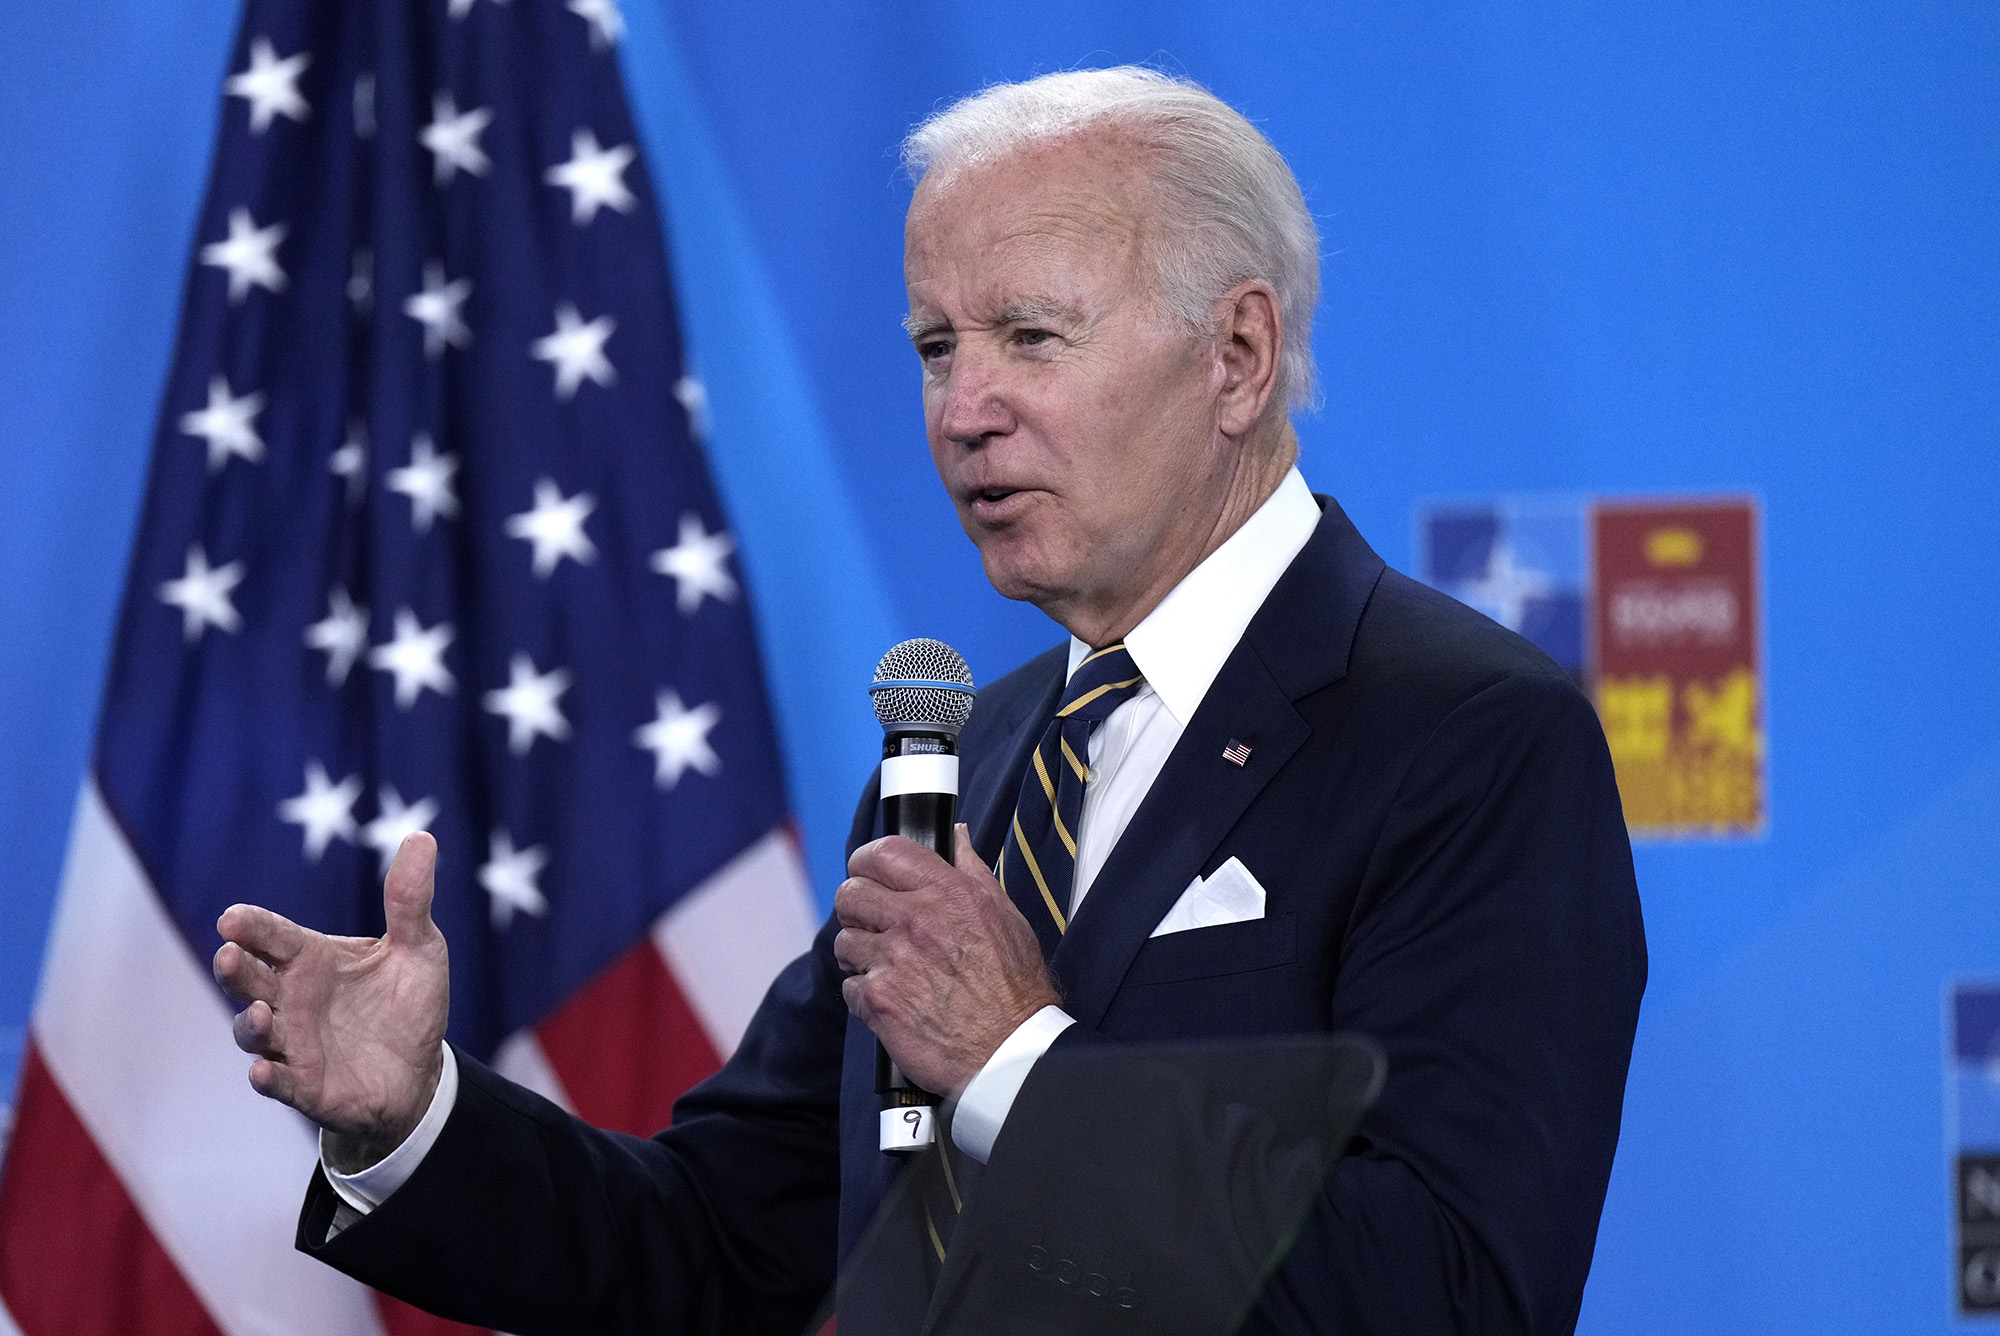 U.S. President Joe Biden speaks during a media conference at the end of a NATO summit in Madrid, Spain, on June 30.